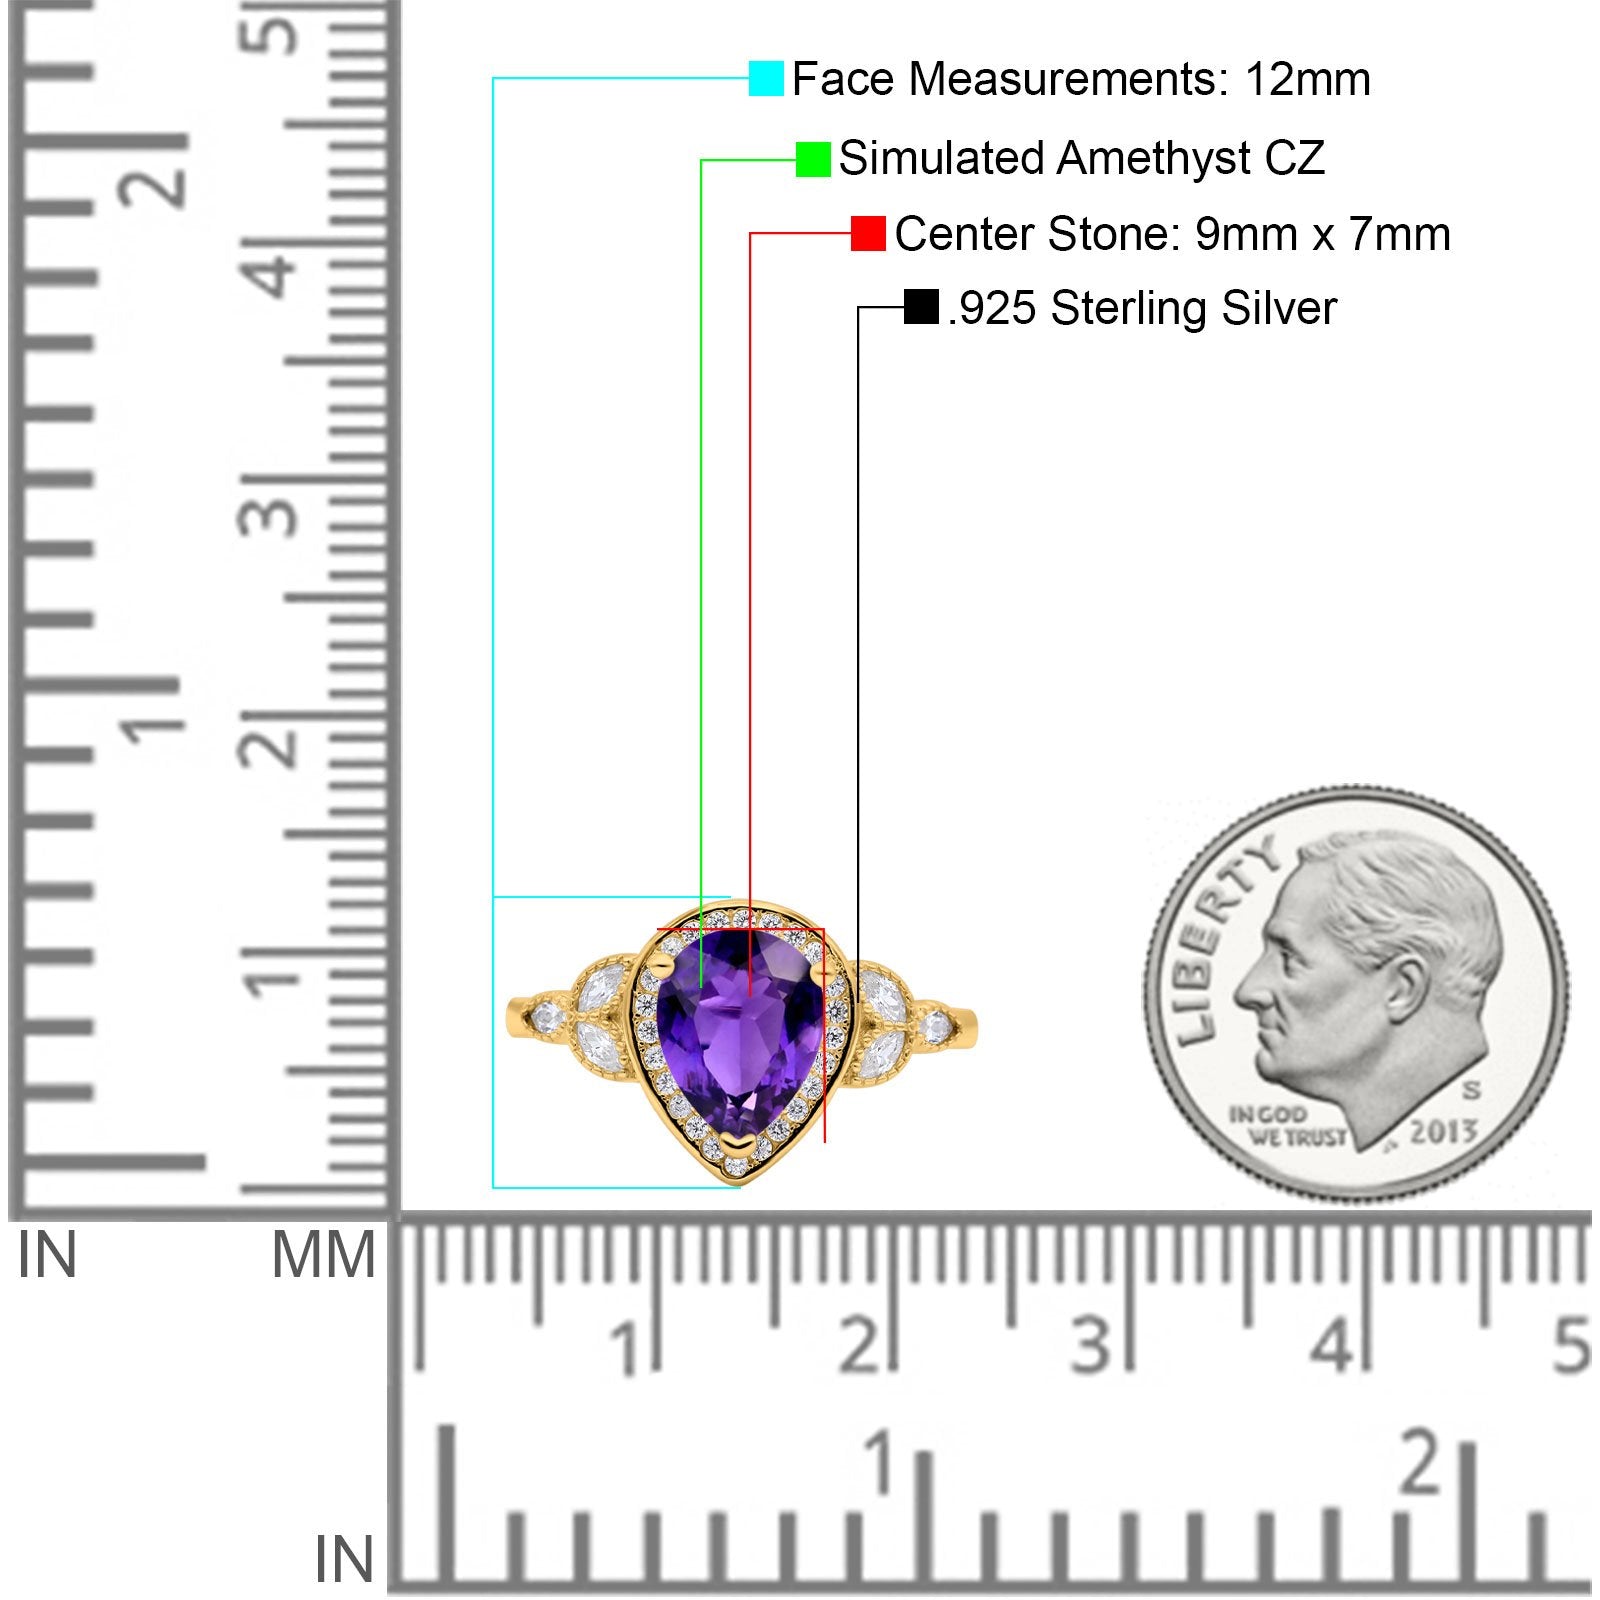 Halo Art Deco Wedding Pear Bridal Ring Marquise Round Simulated Cubic Zirconia 925 Sterling Silver